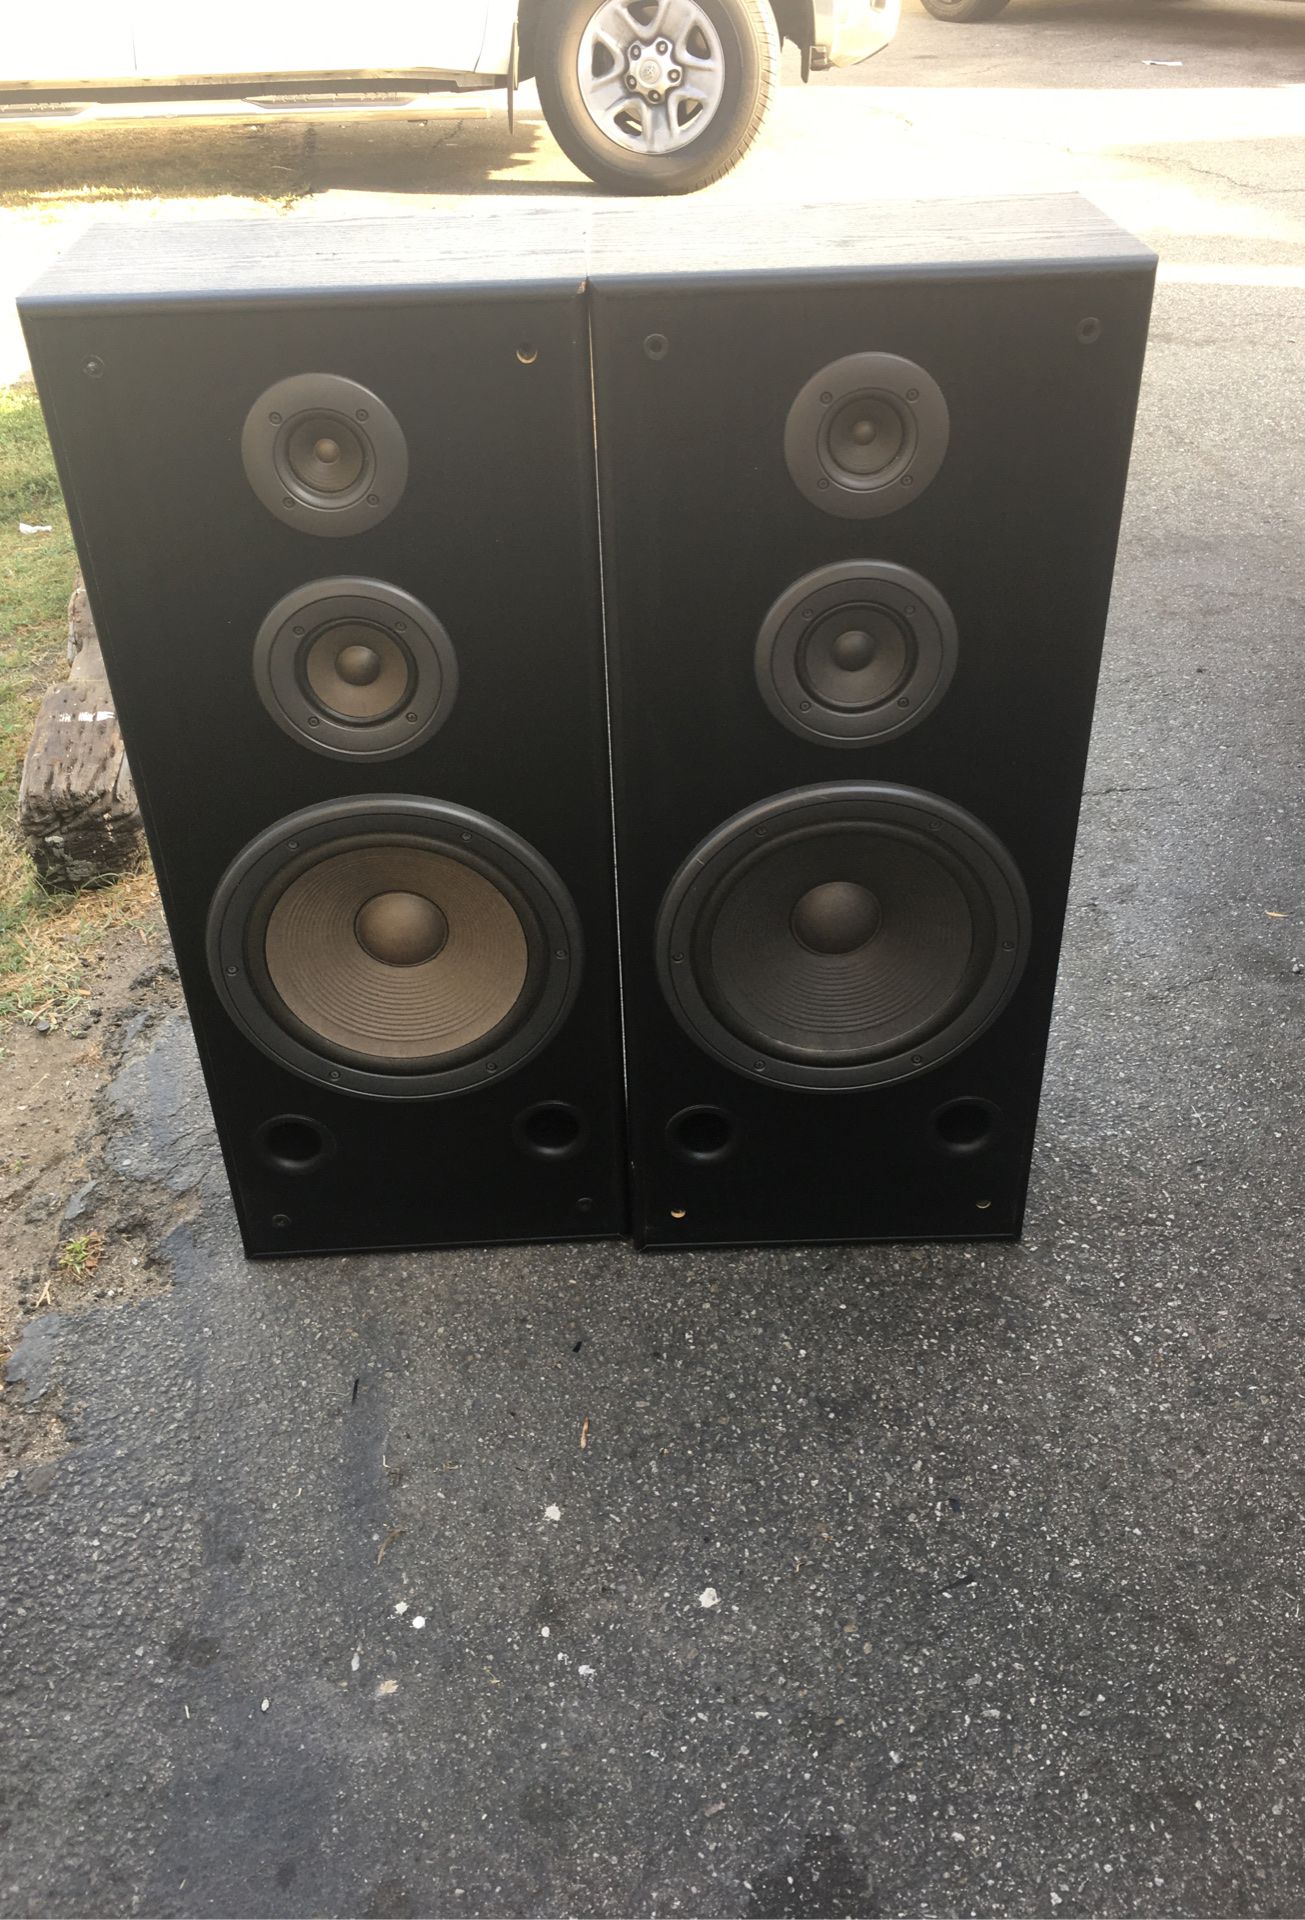 Technics speakers 12” only one have front screen